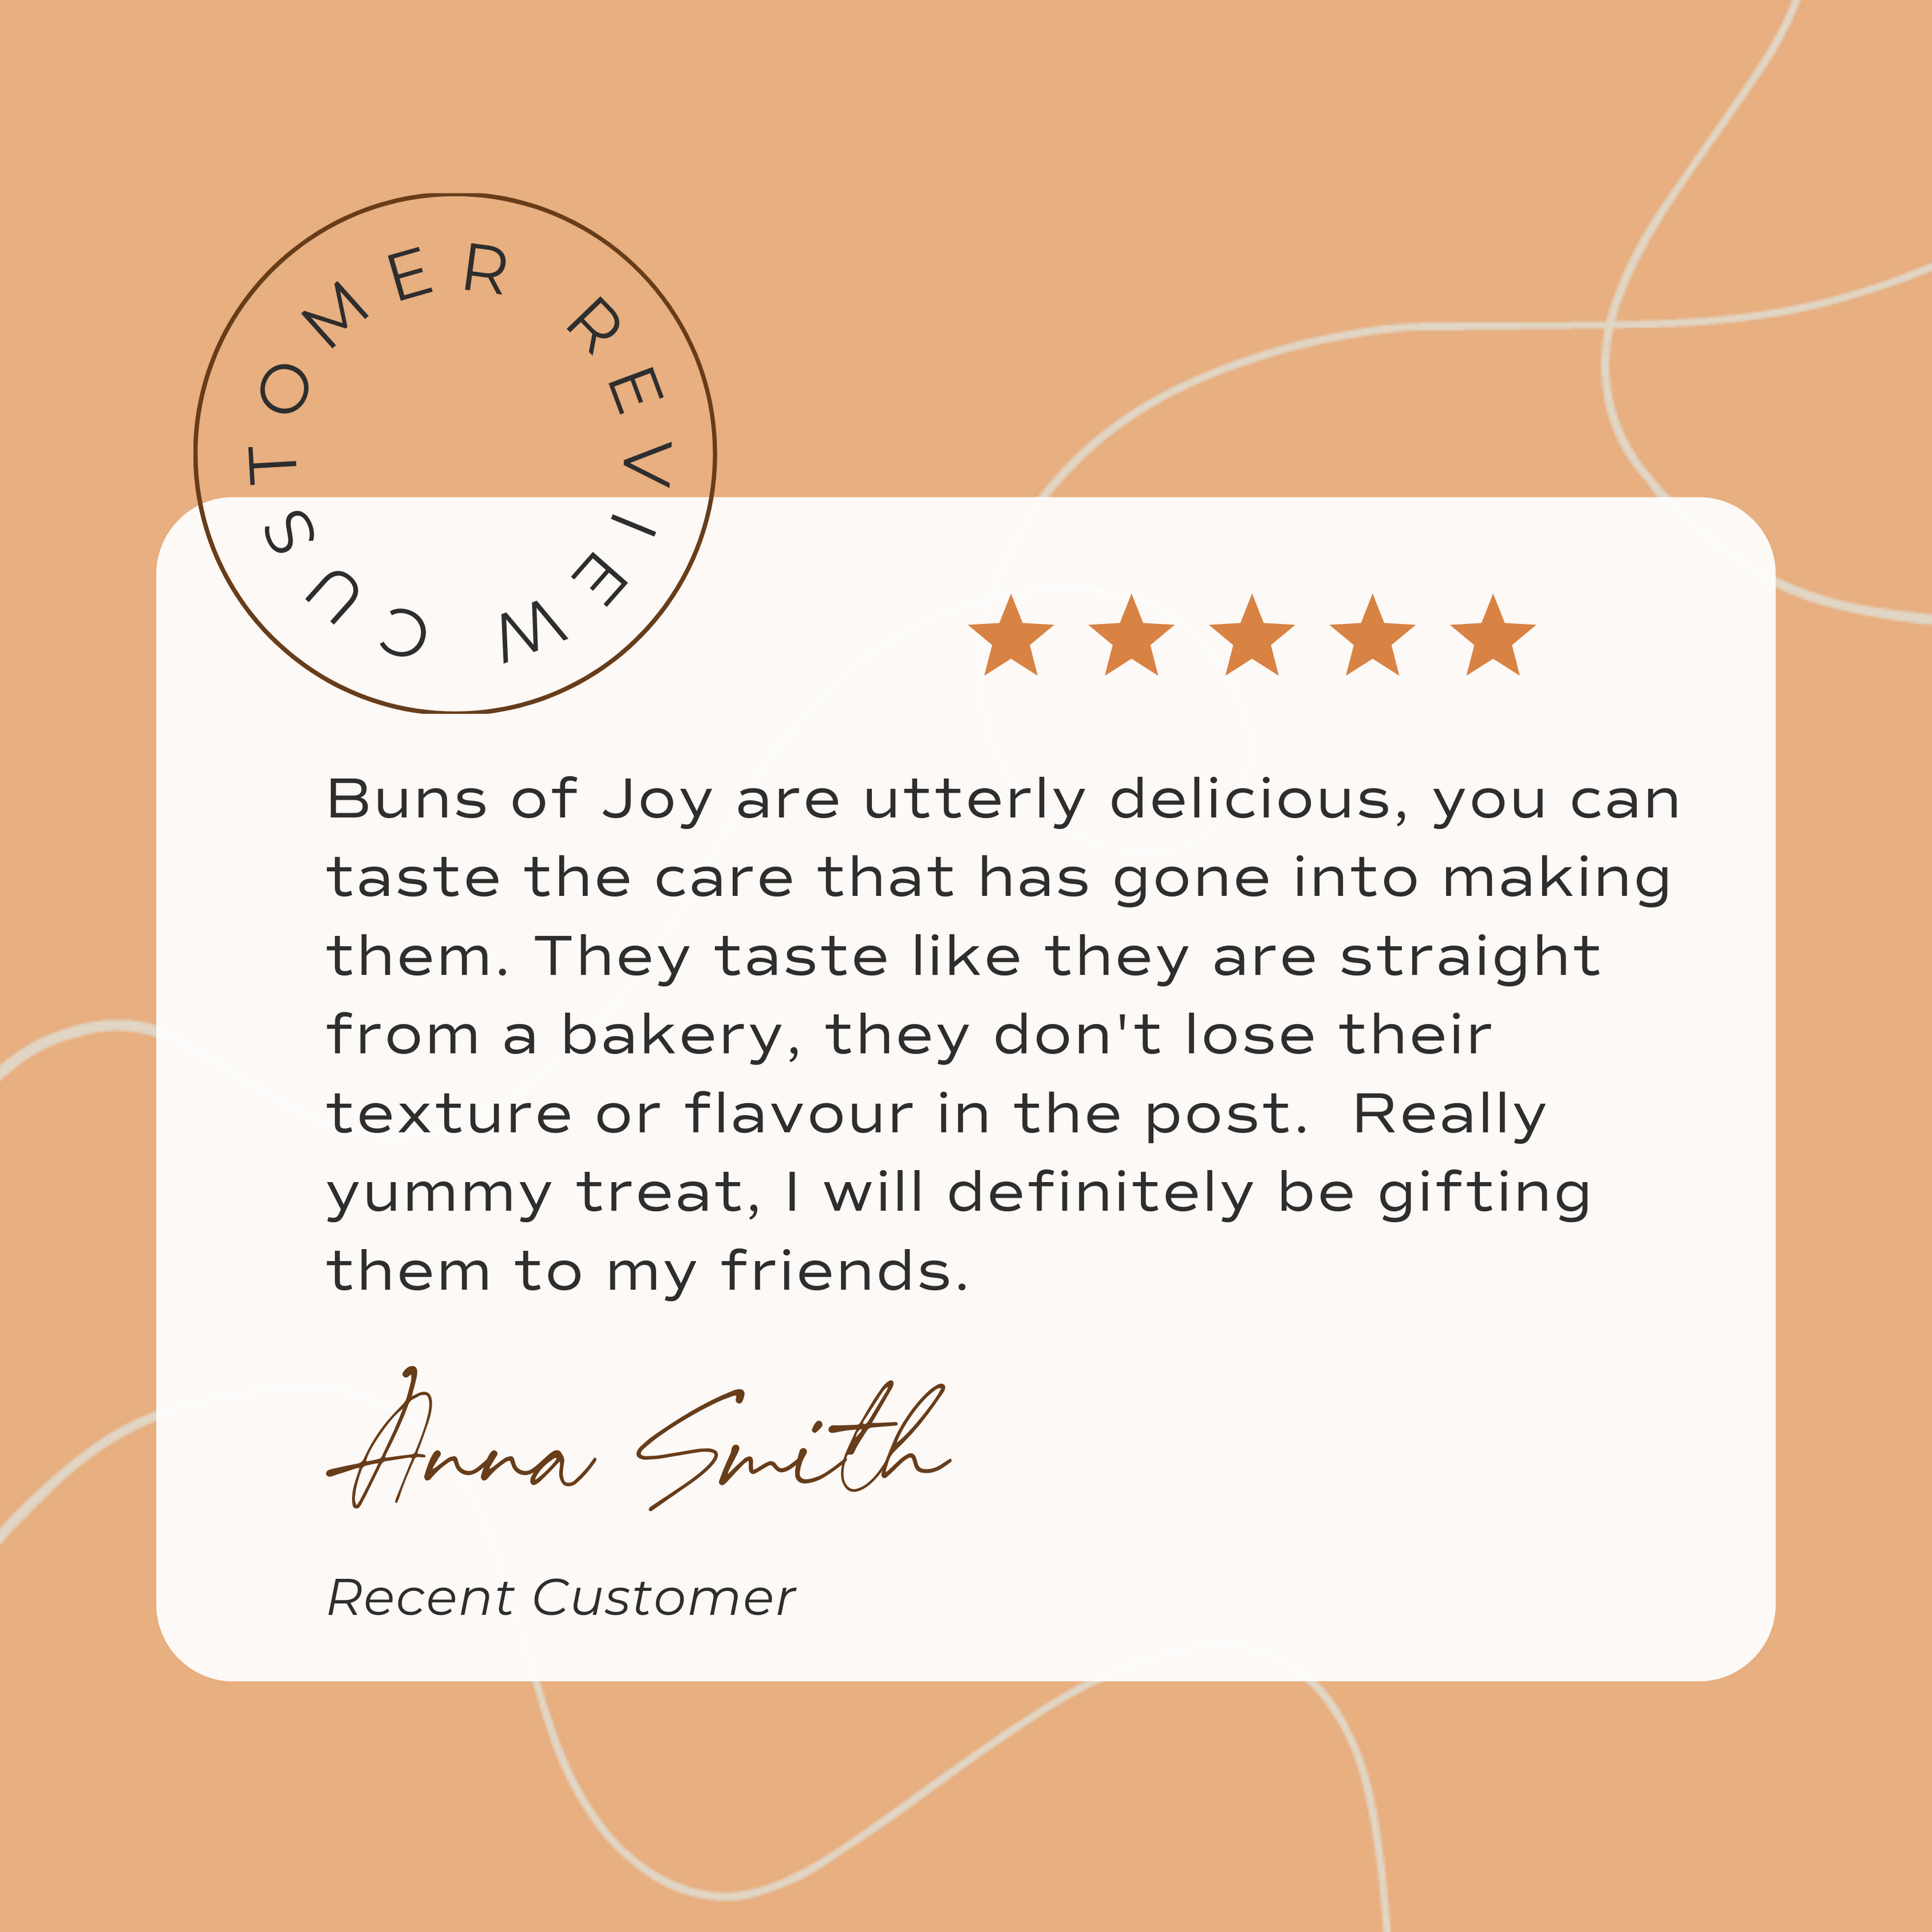 5 star customer review for Cinnamon Buns from Anna